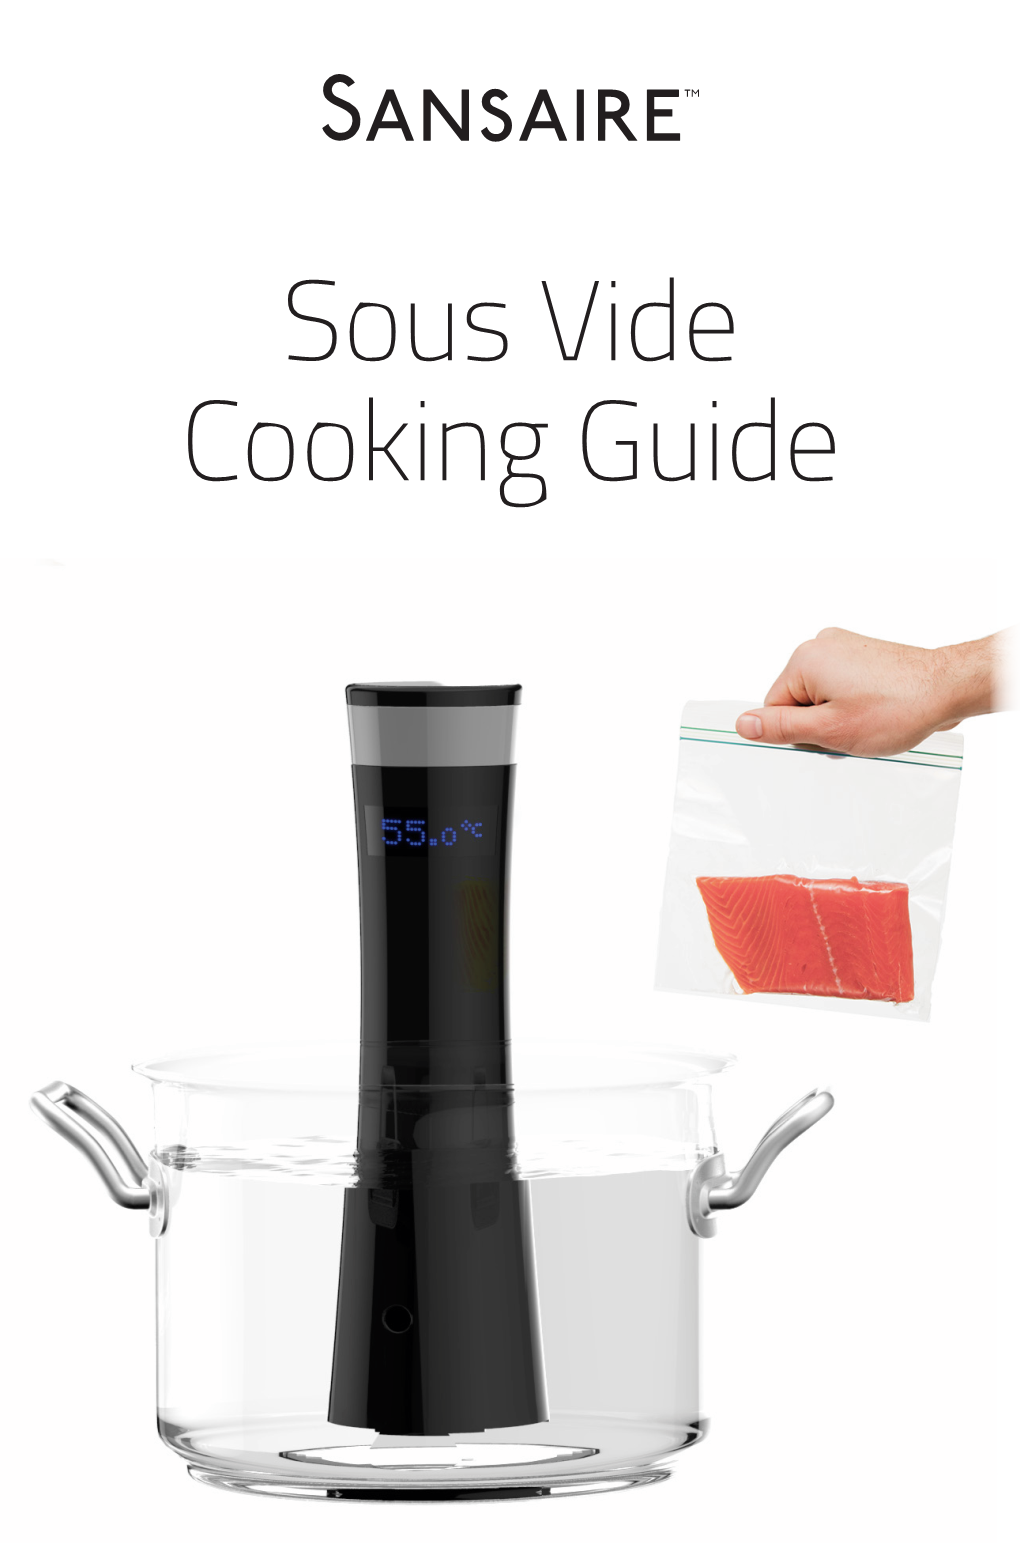 Sous Vide Cooking Guide What Is Sous Vide? Why Cook Sous Vide?